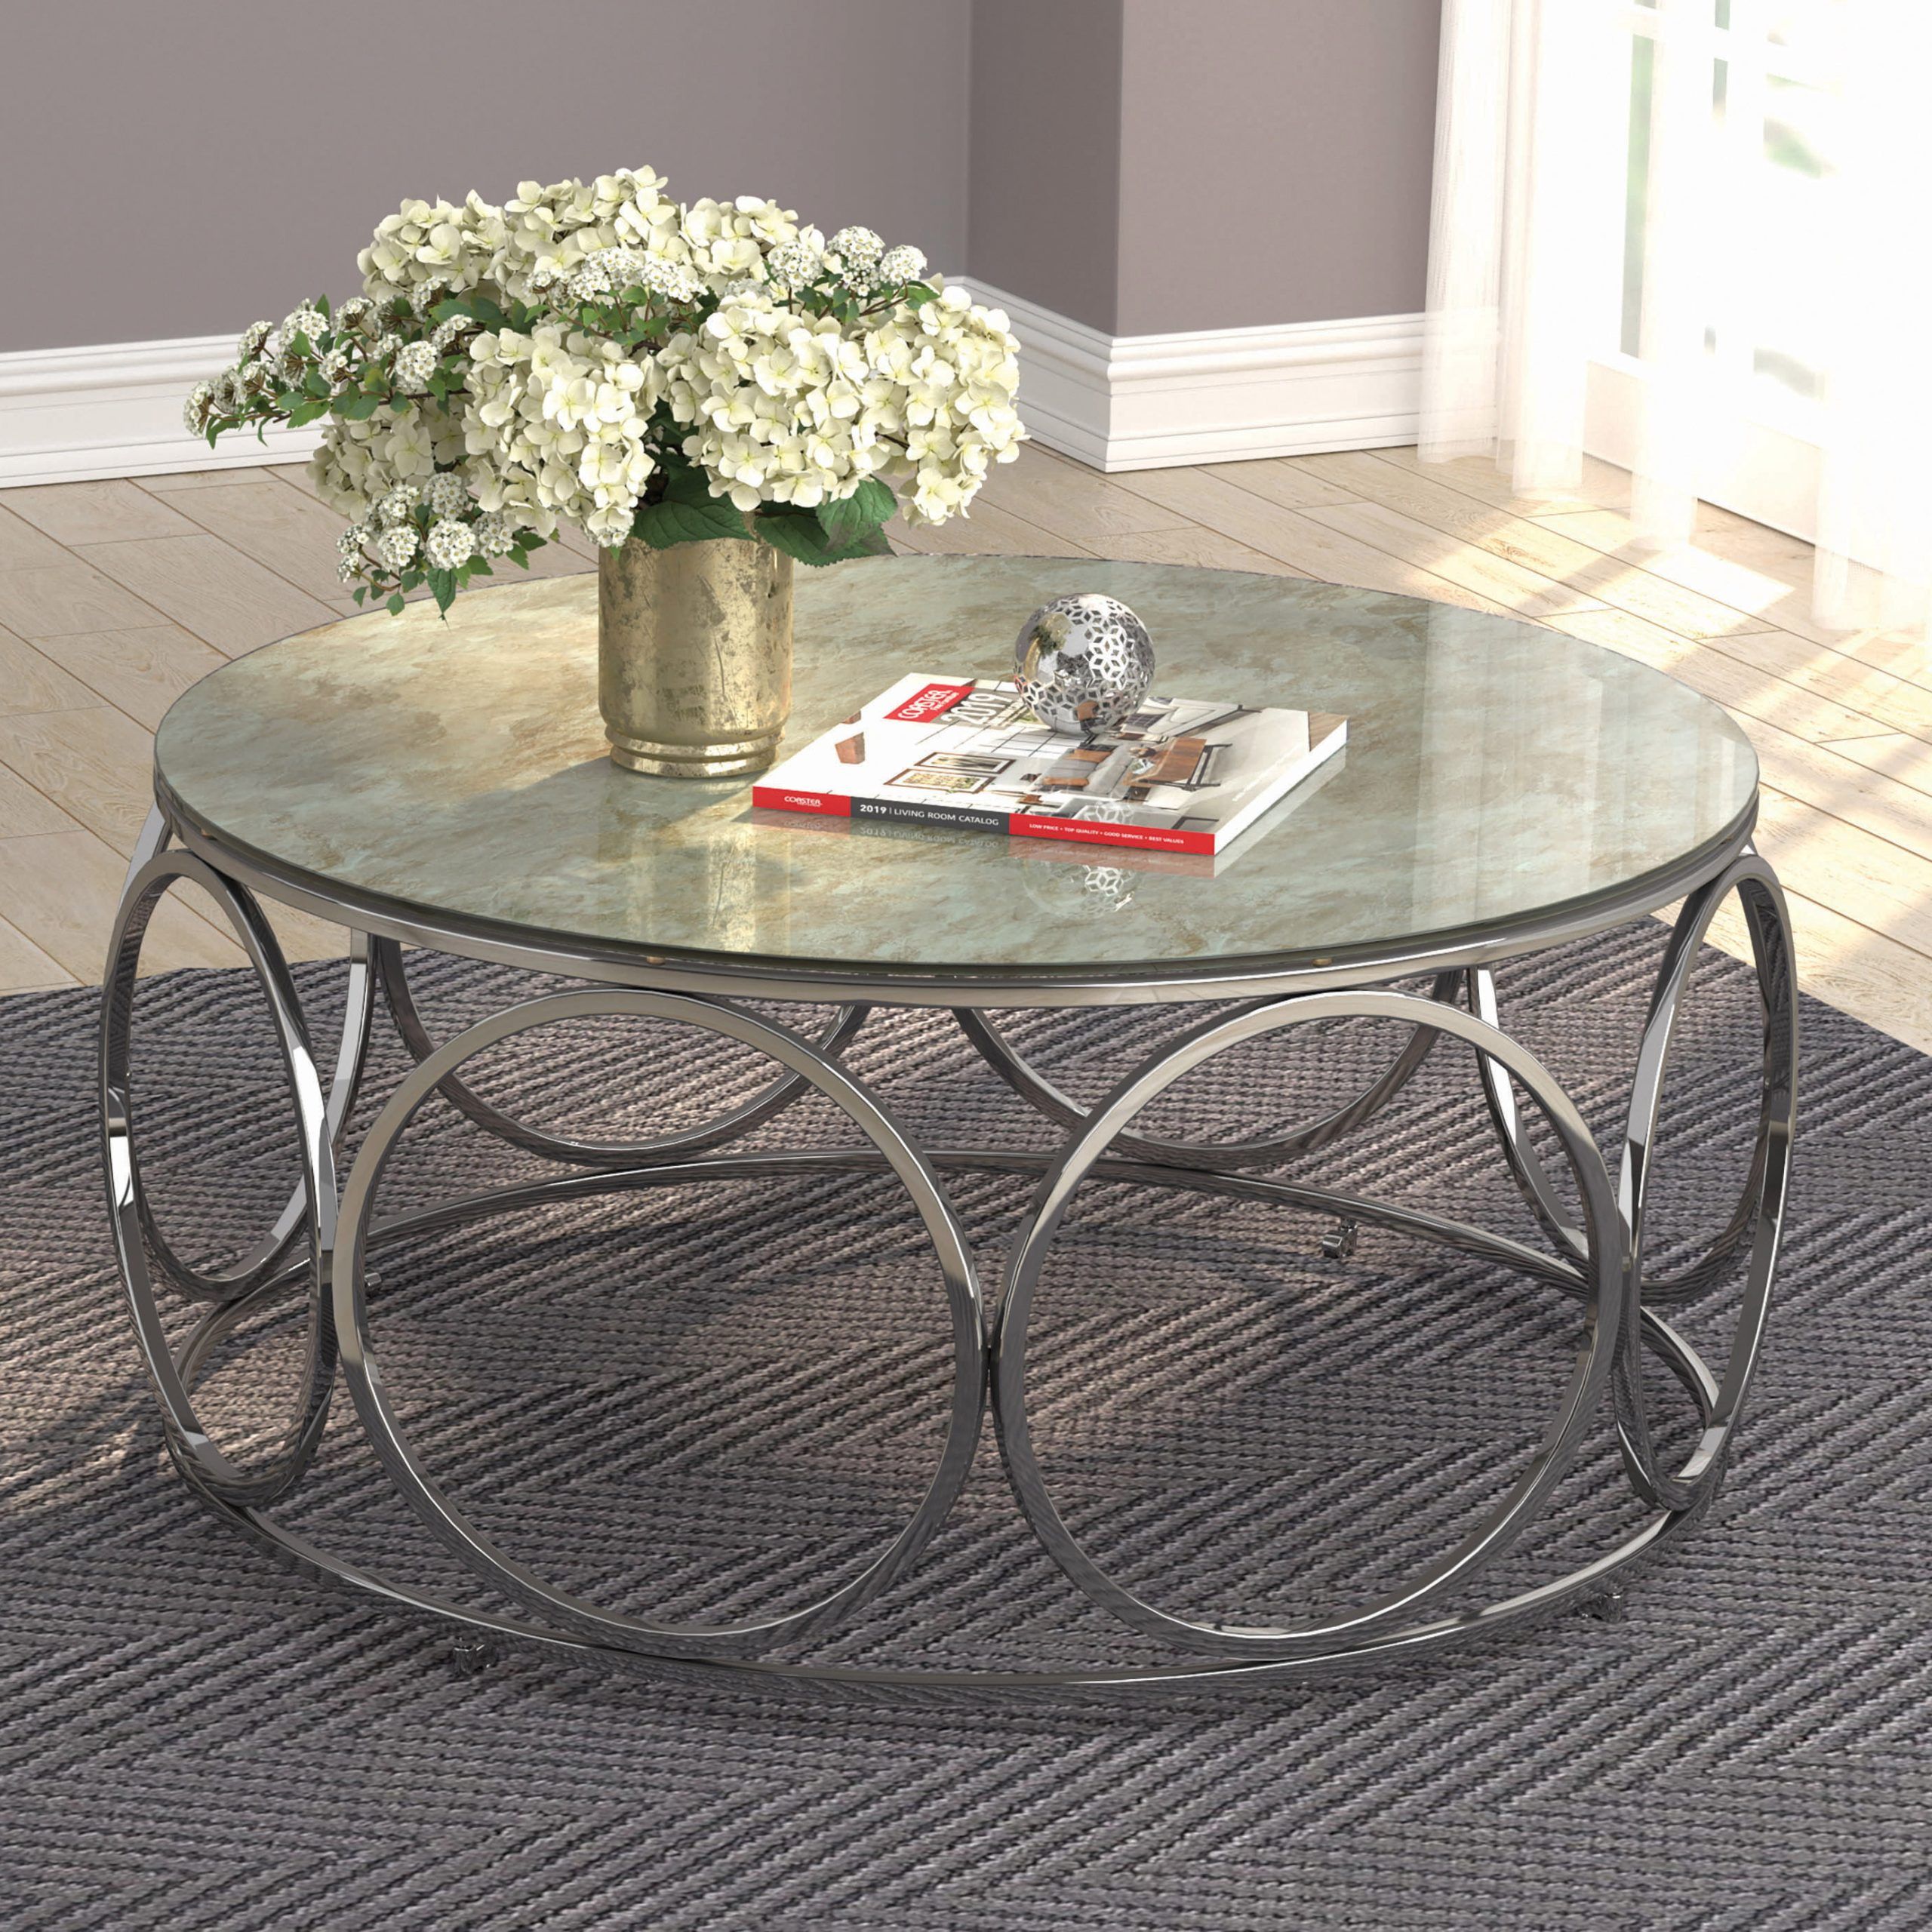 Round Coffee Table With Casters Beige Marble And Chrome – Walmart Inside Coffee Tables With Casters (View 5 of 21)